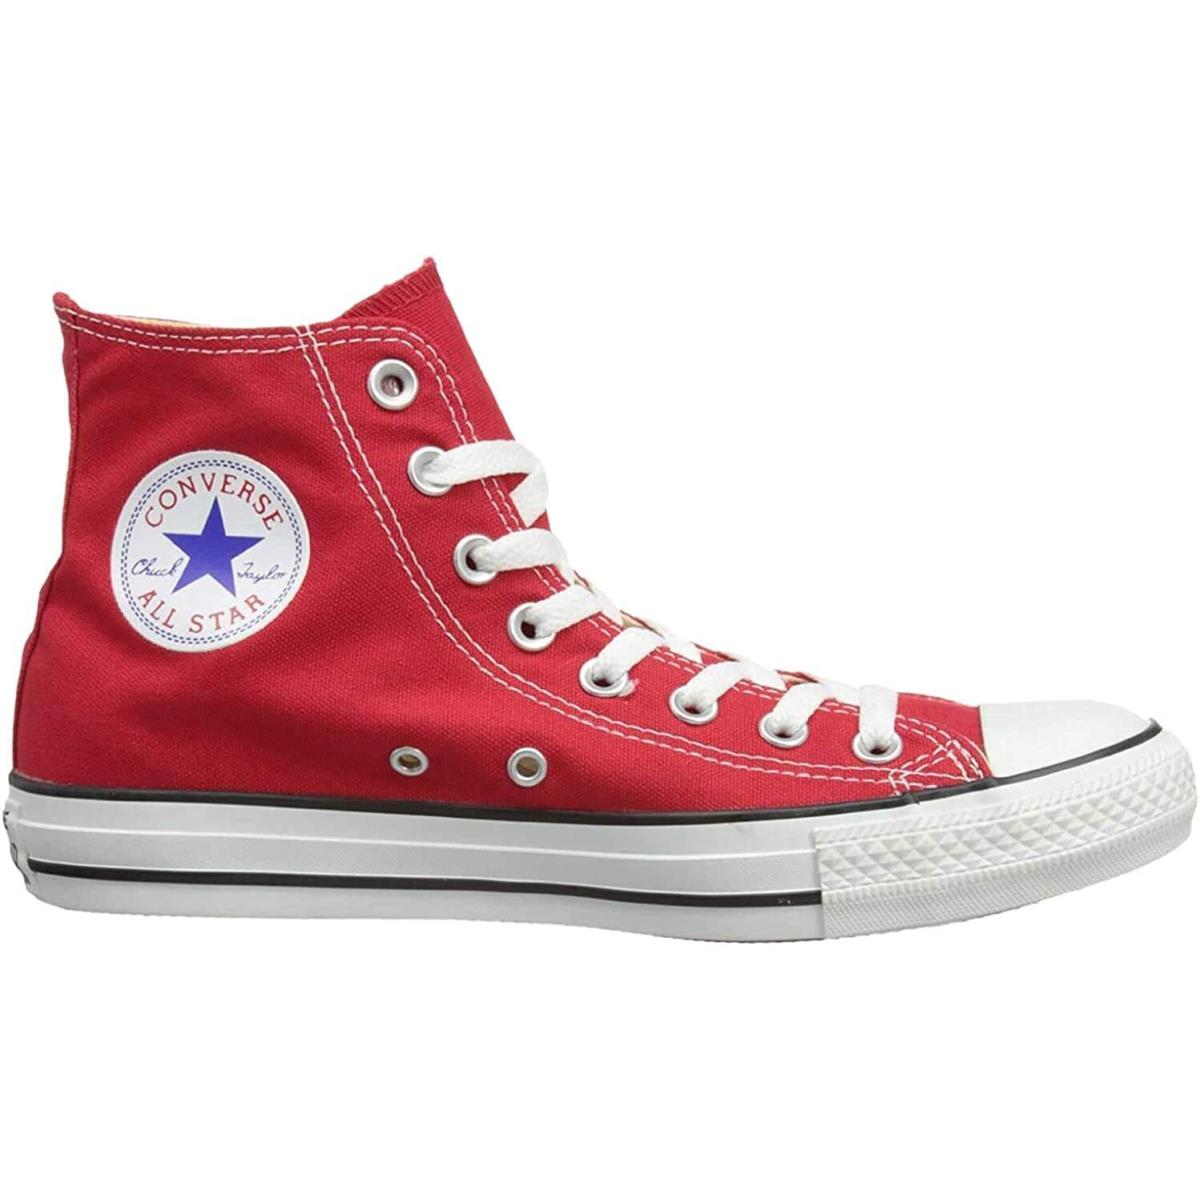 Converse Chuck Taylor All Star High Top Unisex Canvas Sneaker Classic Shoes Red